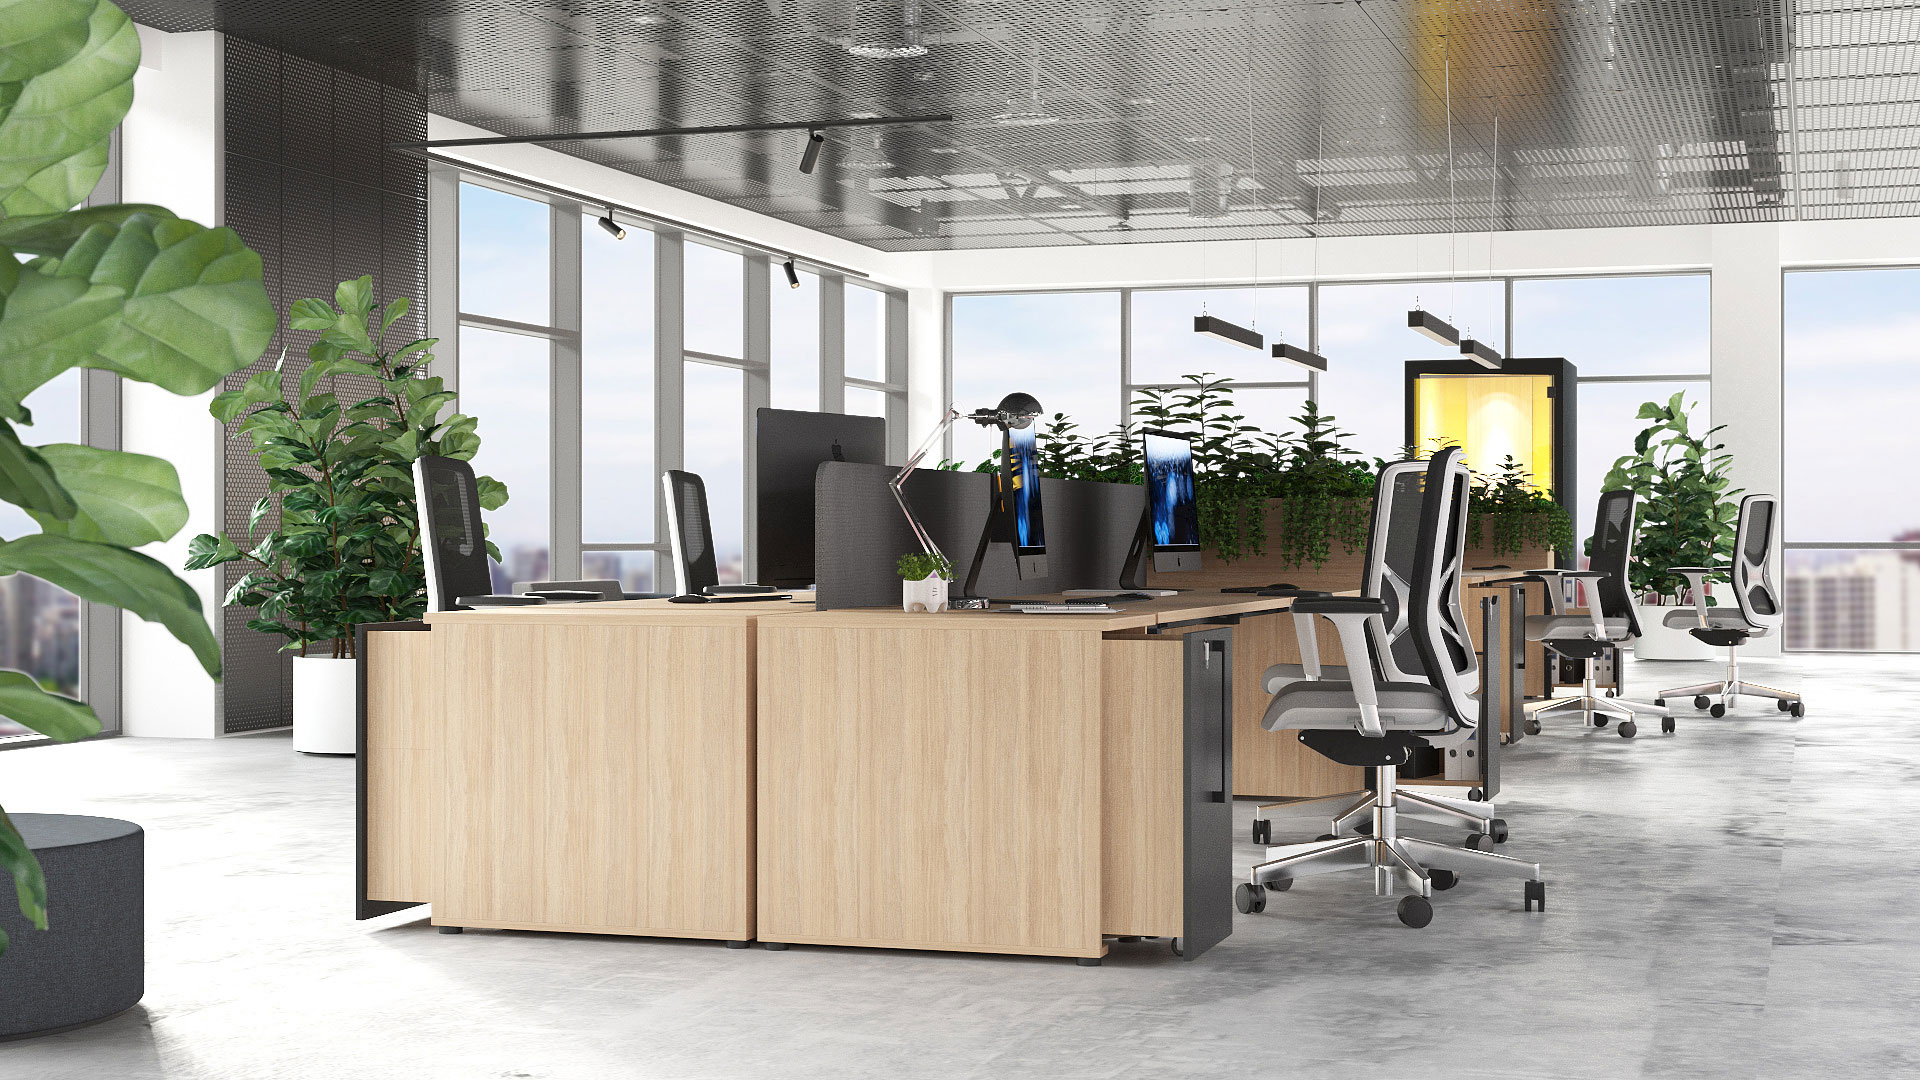 Boxi towers work seamlessly with Nova bench desking